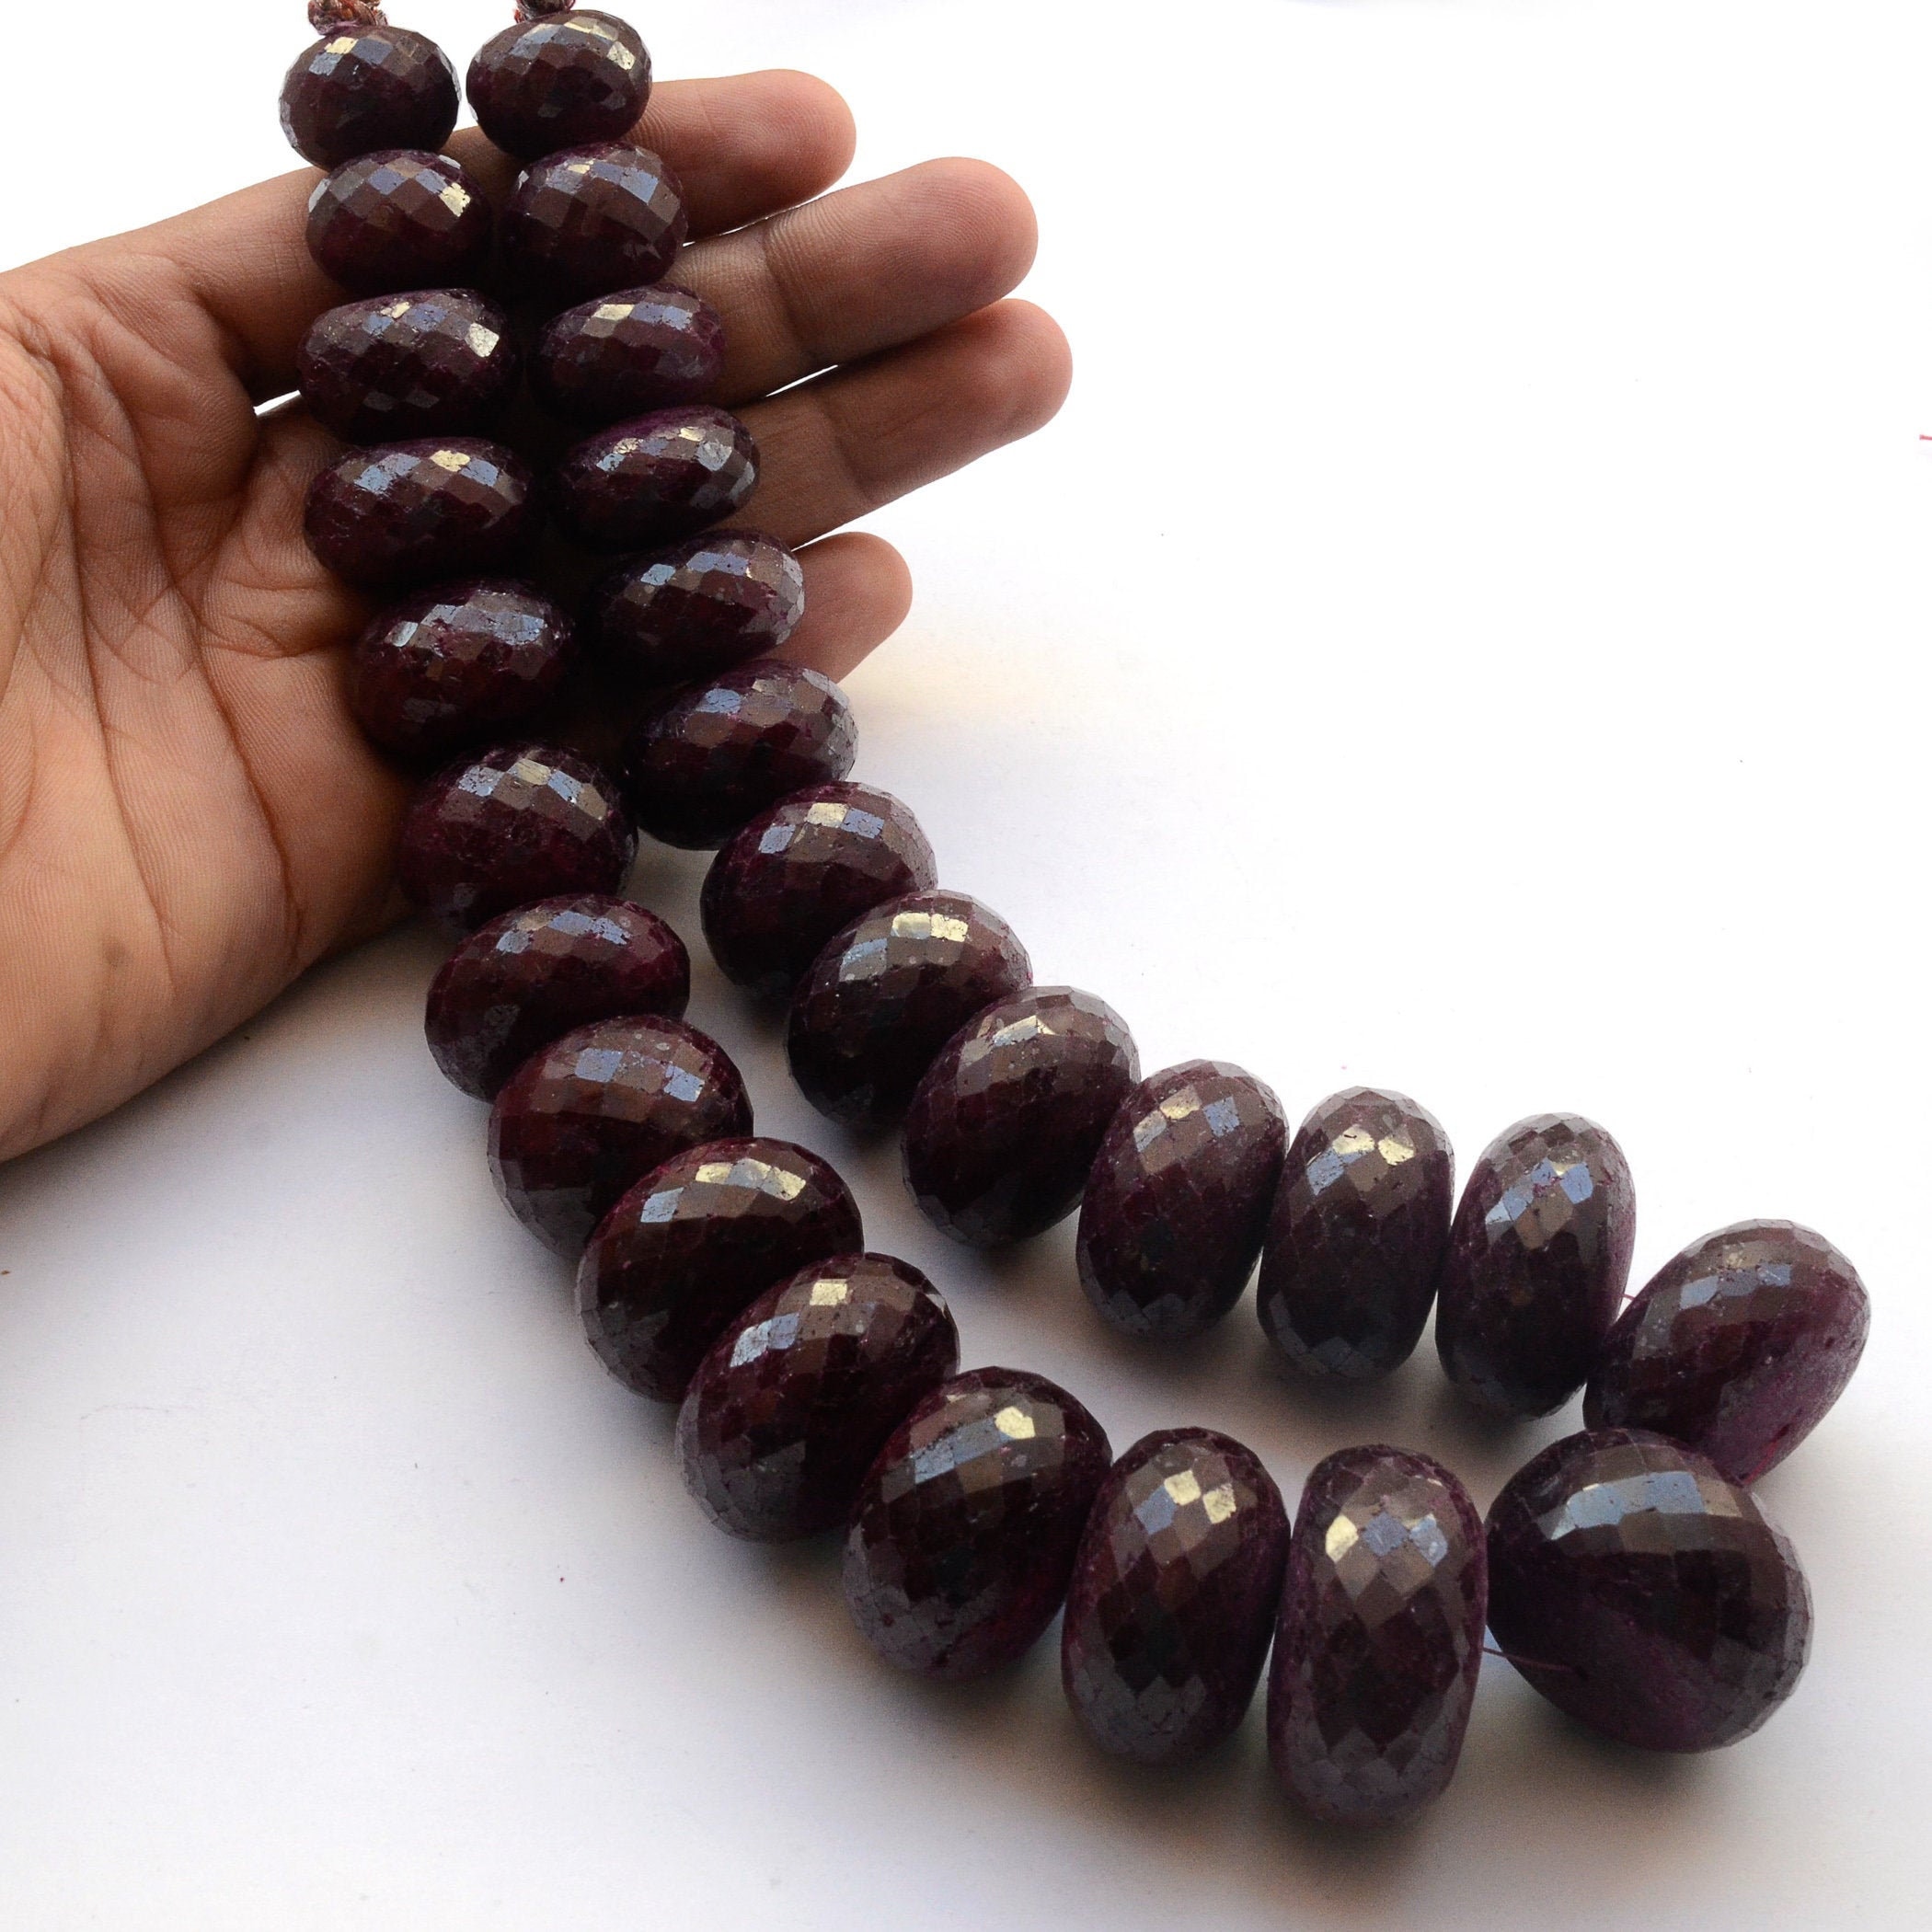 Amazing Red Corundum Faceted Rondelle Beads Ruby Corundum faceted beads Gemstone for Necklace Jewelry making SALE 7 inch strand 4-4.5 mm